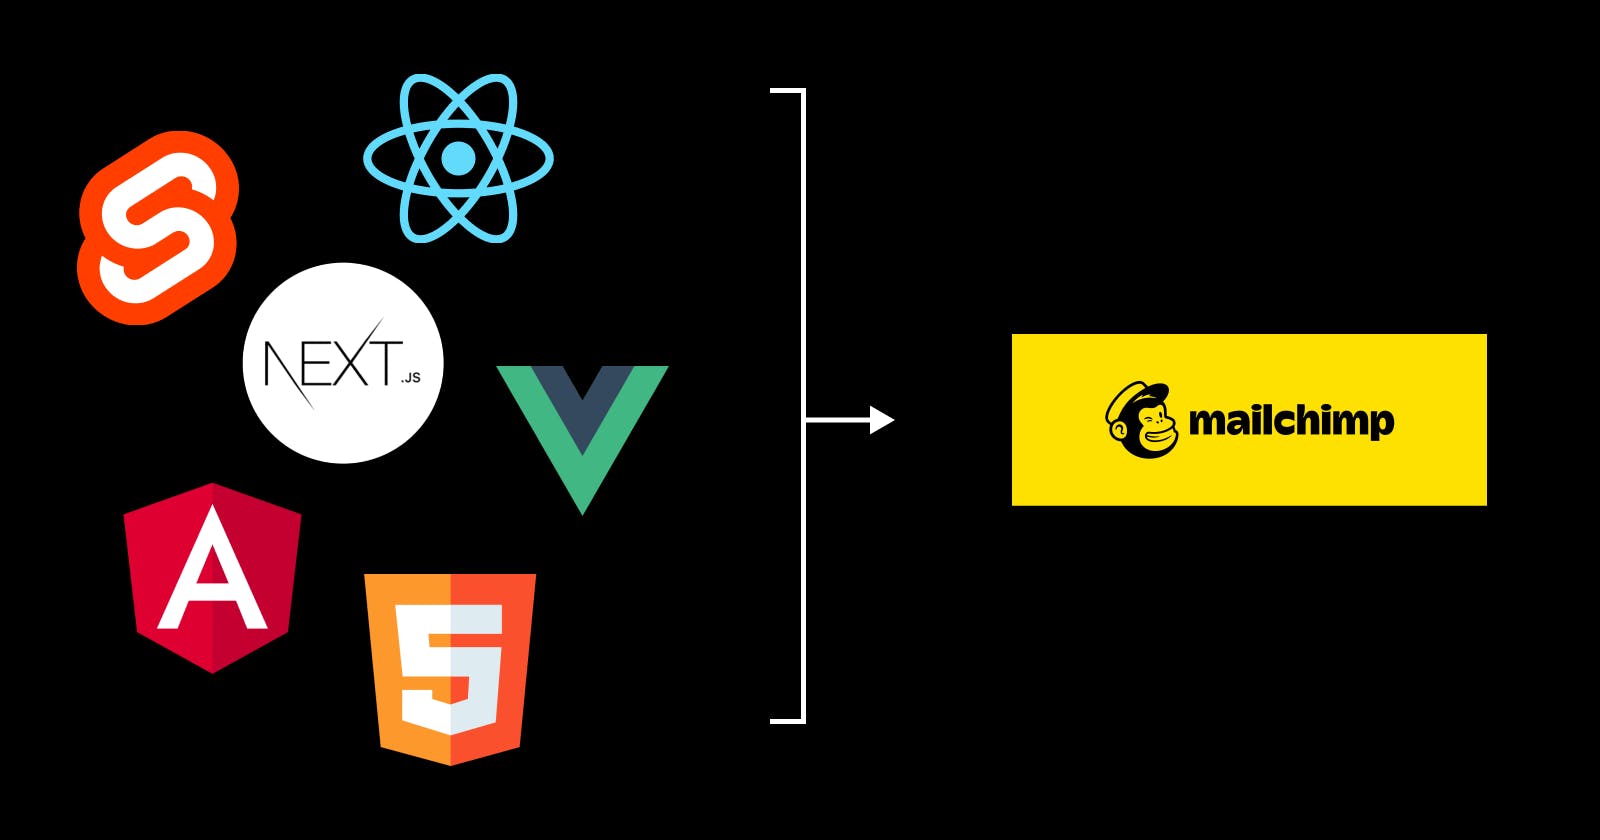 How to integrate mailchimp with React